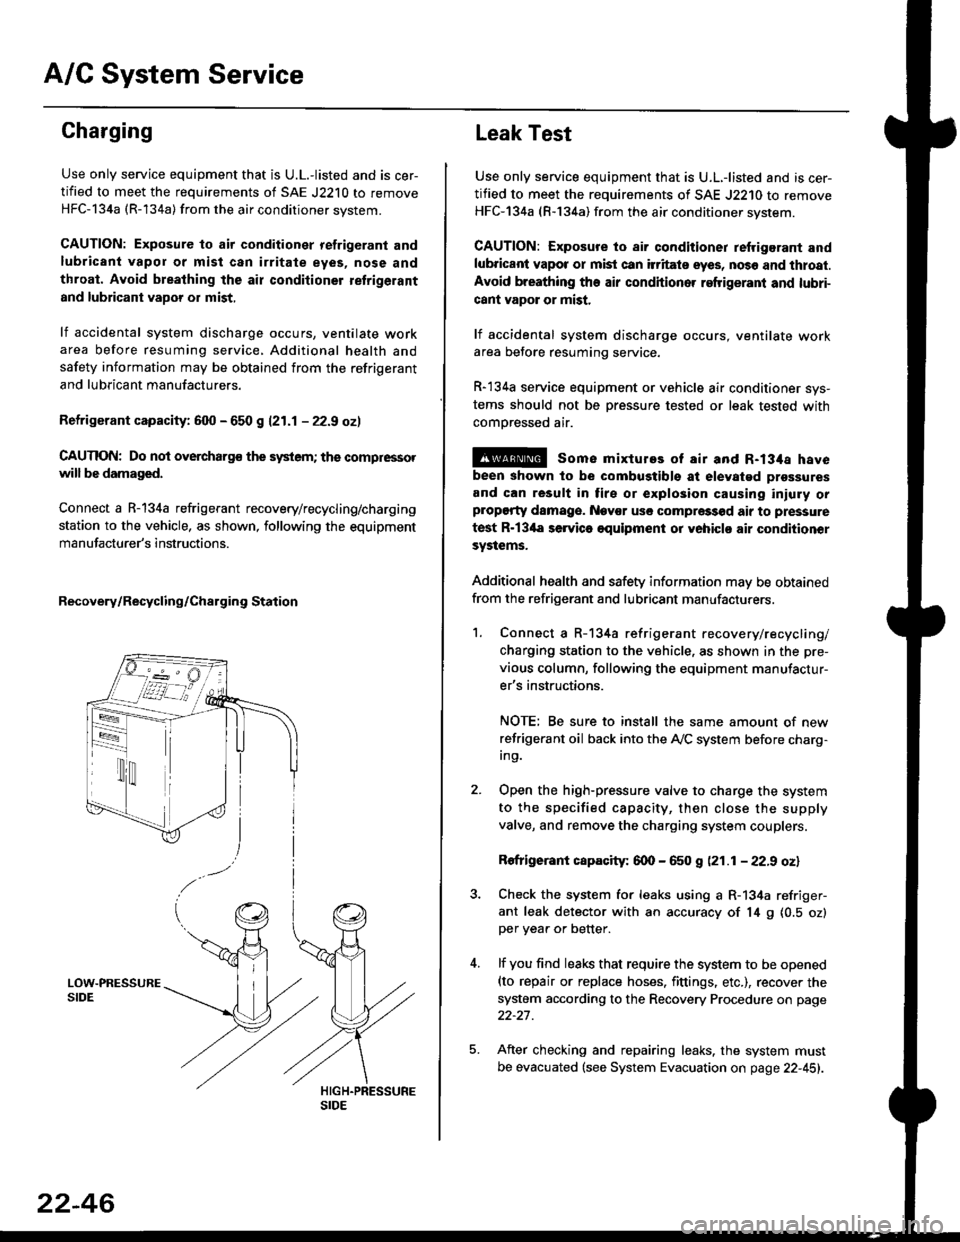 HONDA CIVIC 1996 6.G Workshop Manual A/C System Service
Charging
Use only service equipment that is U.L.-listed and is cer-
tified to meet the requirements of SAE J2210 to remove
HFC-134a (R-134a) from the air conditioner system.
CAUTION